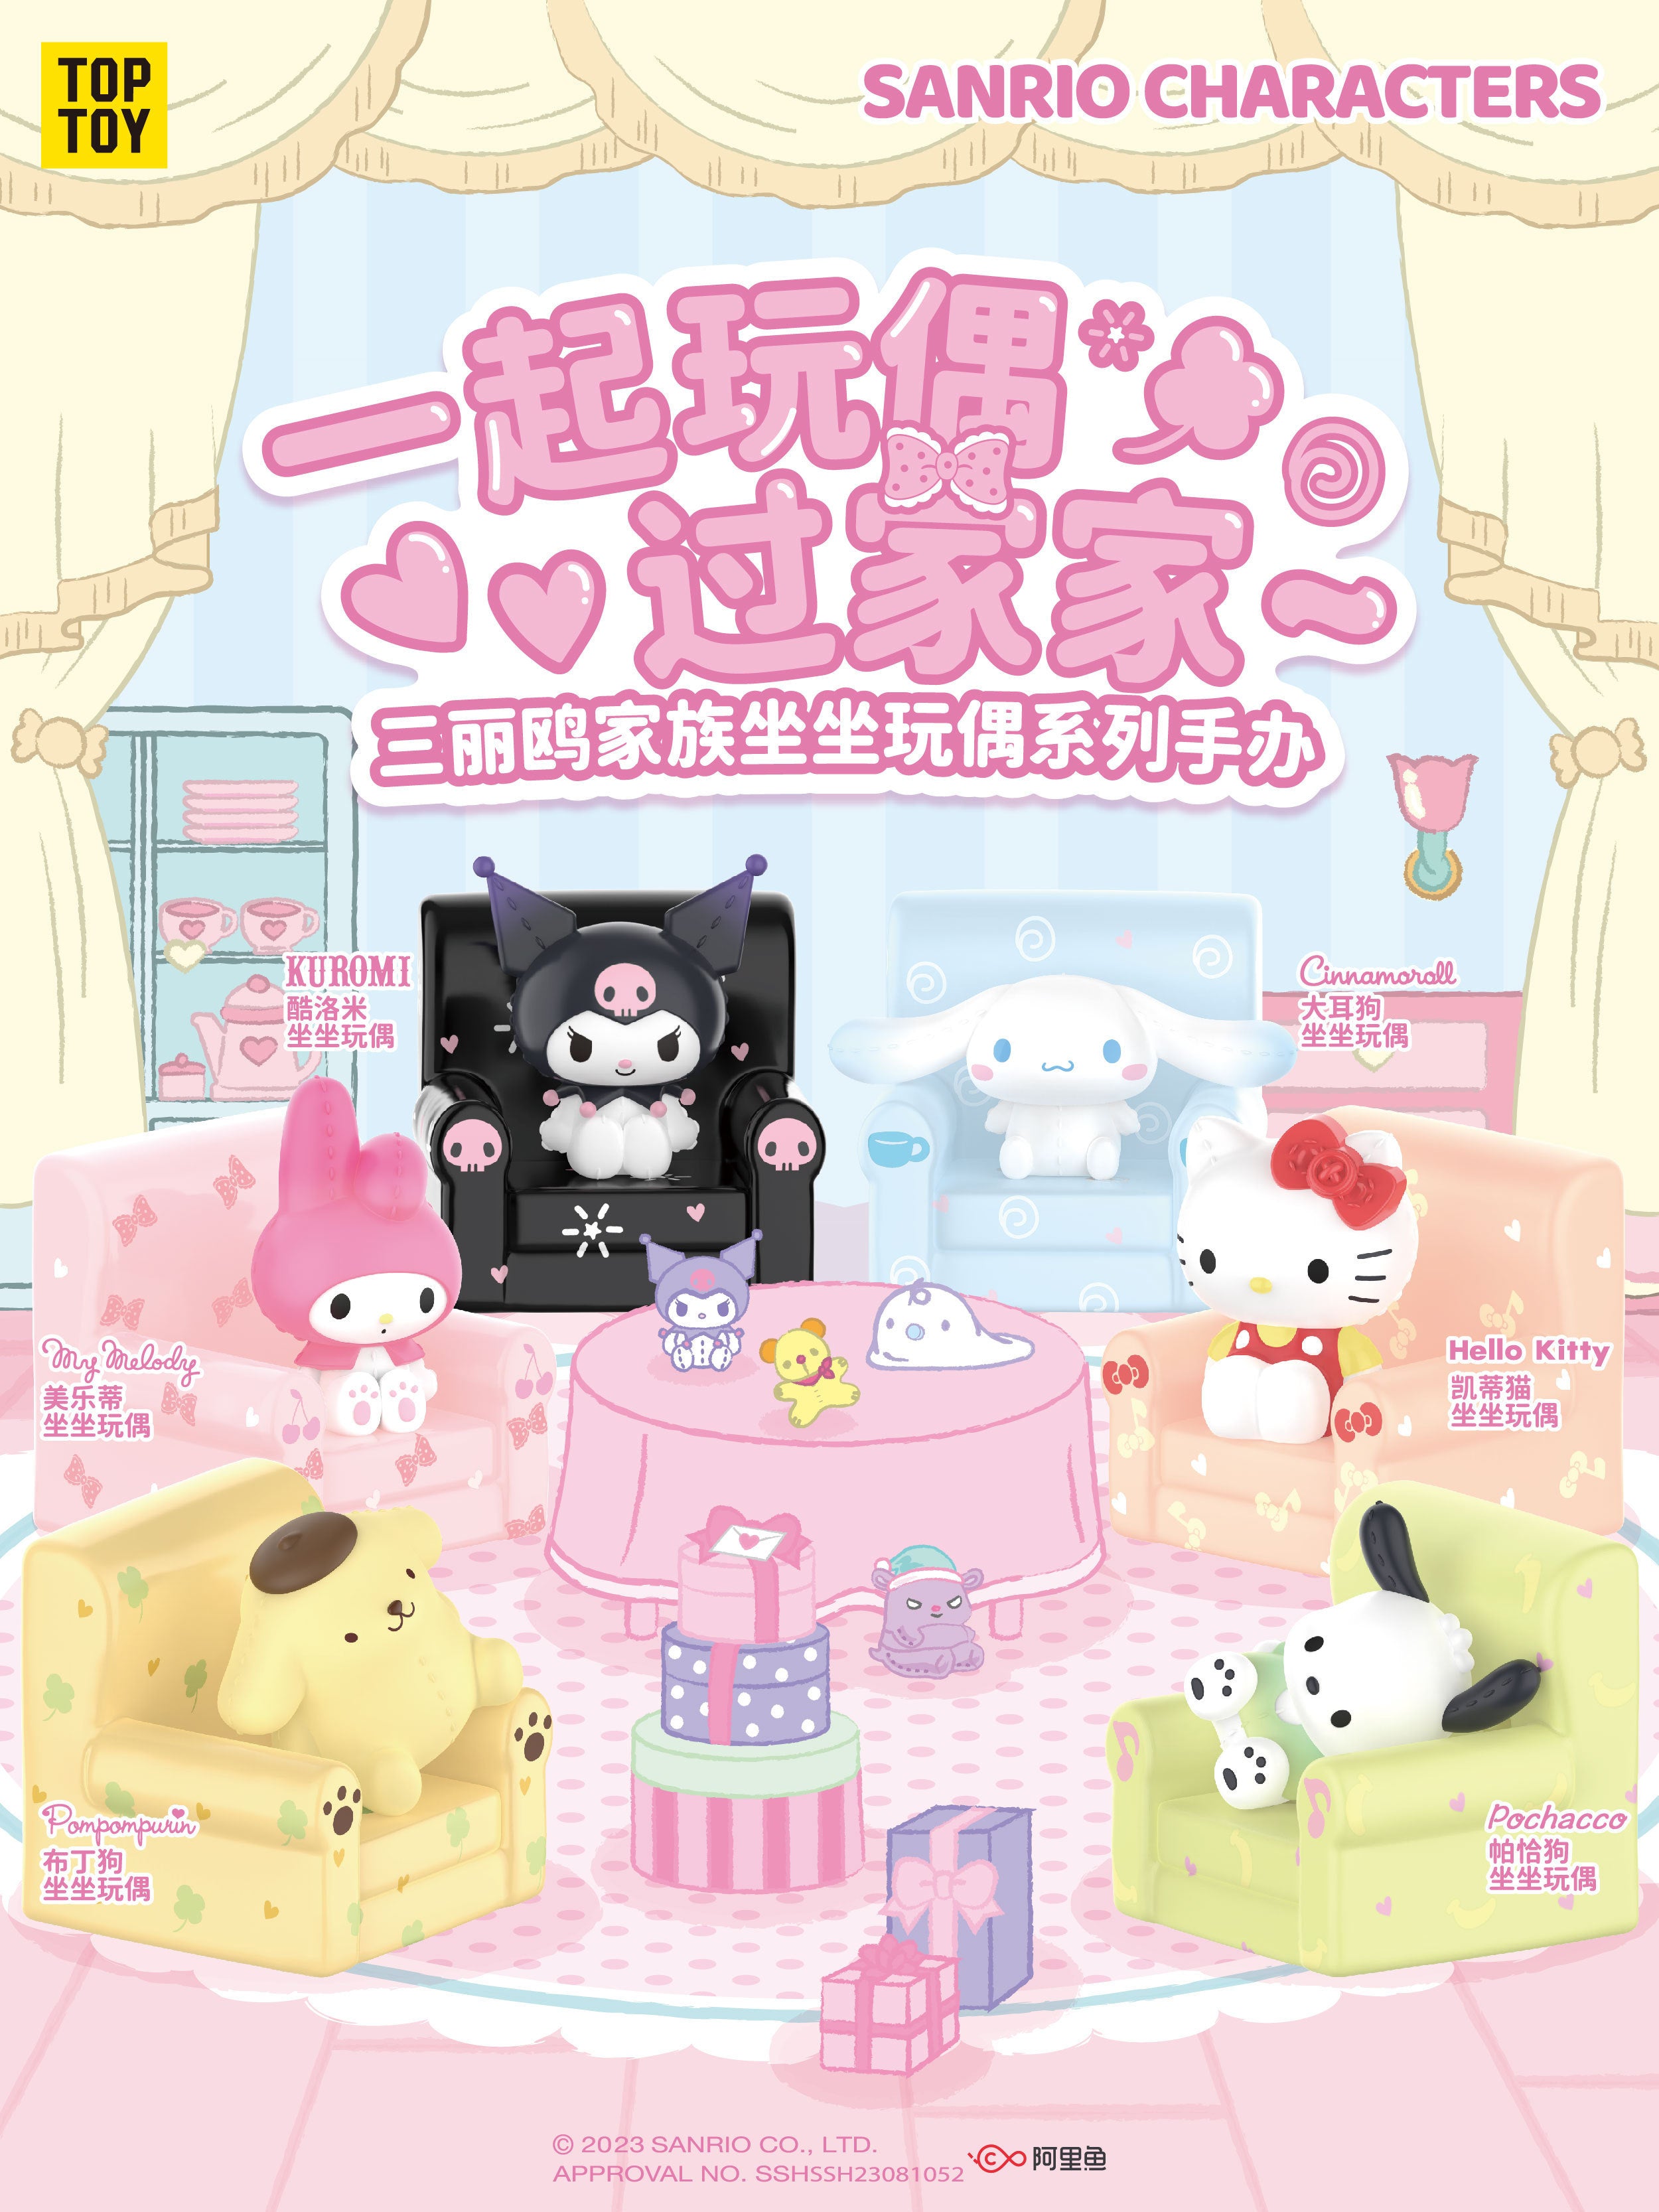 [TOP TOY] SANRIO - Sanrio Characters Sitting Dolls Blind Box